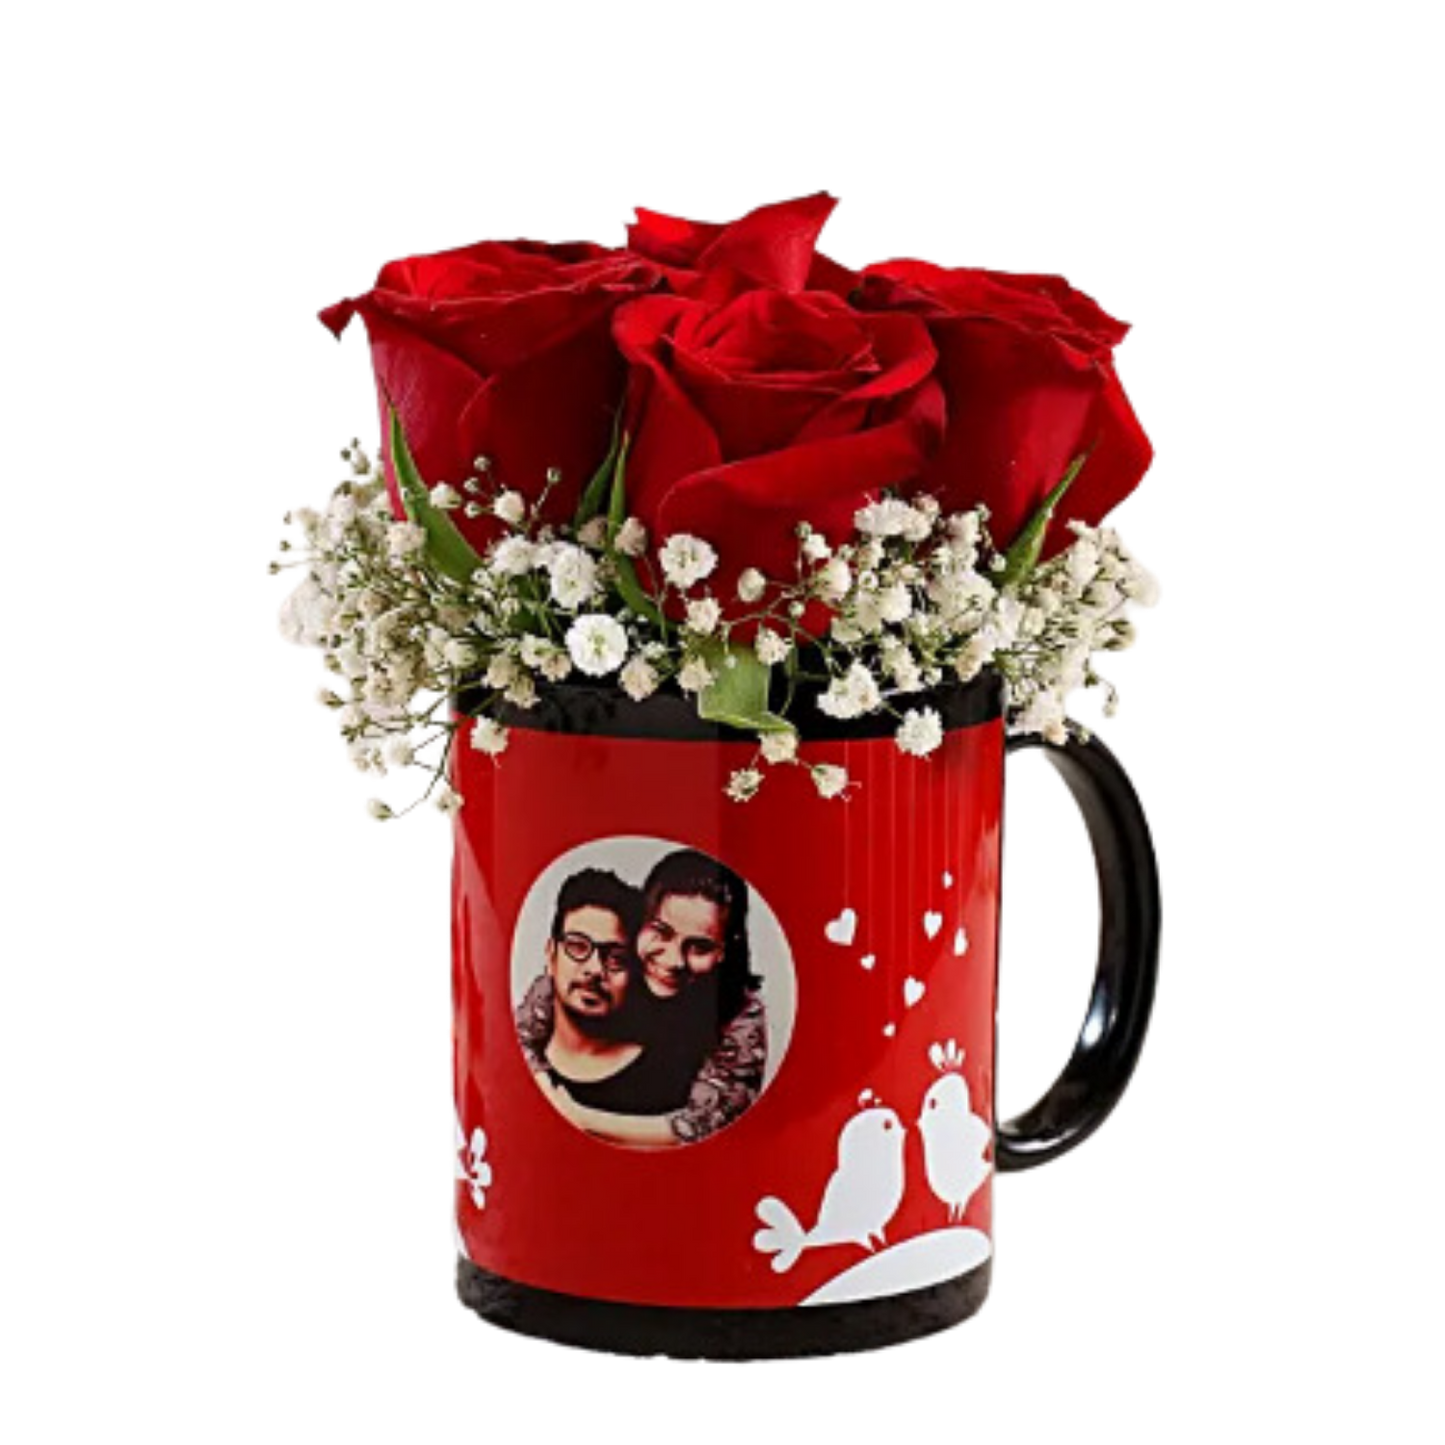 "Lovebirds Embraced by Red Roses: A Personalized Mug"